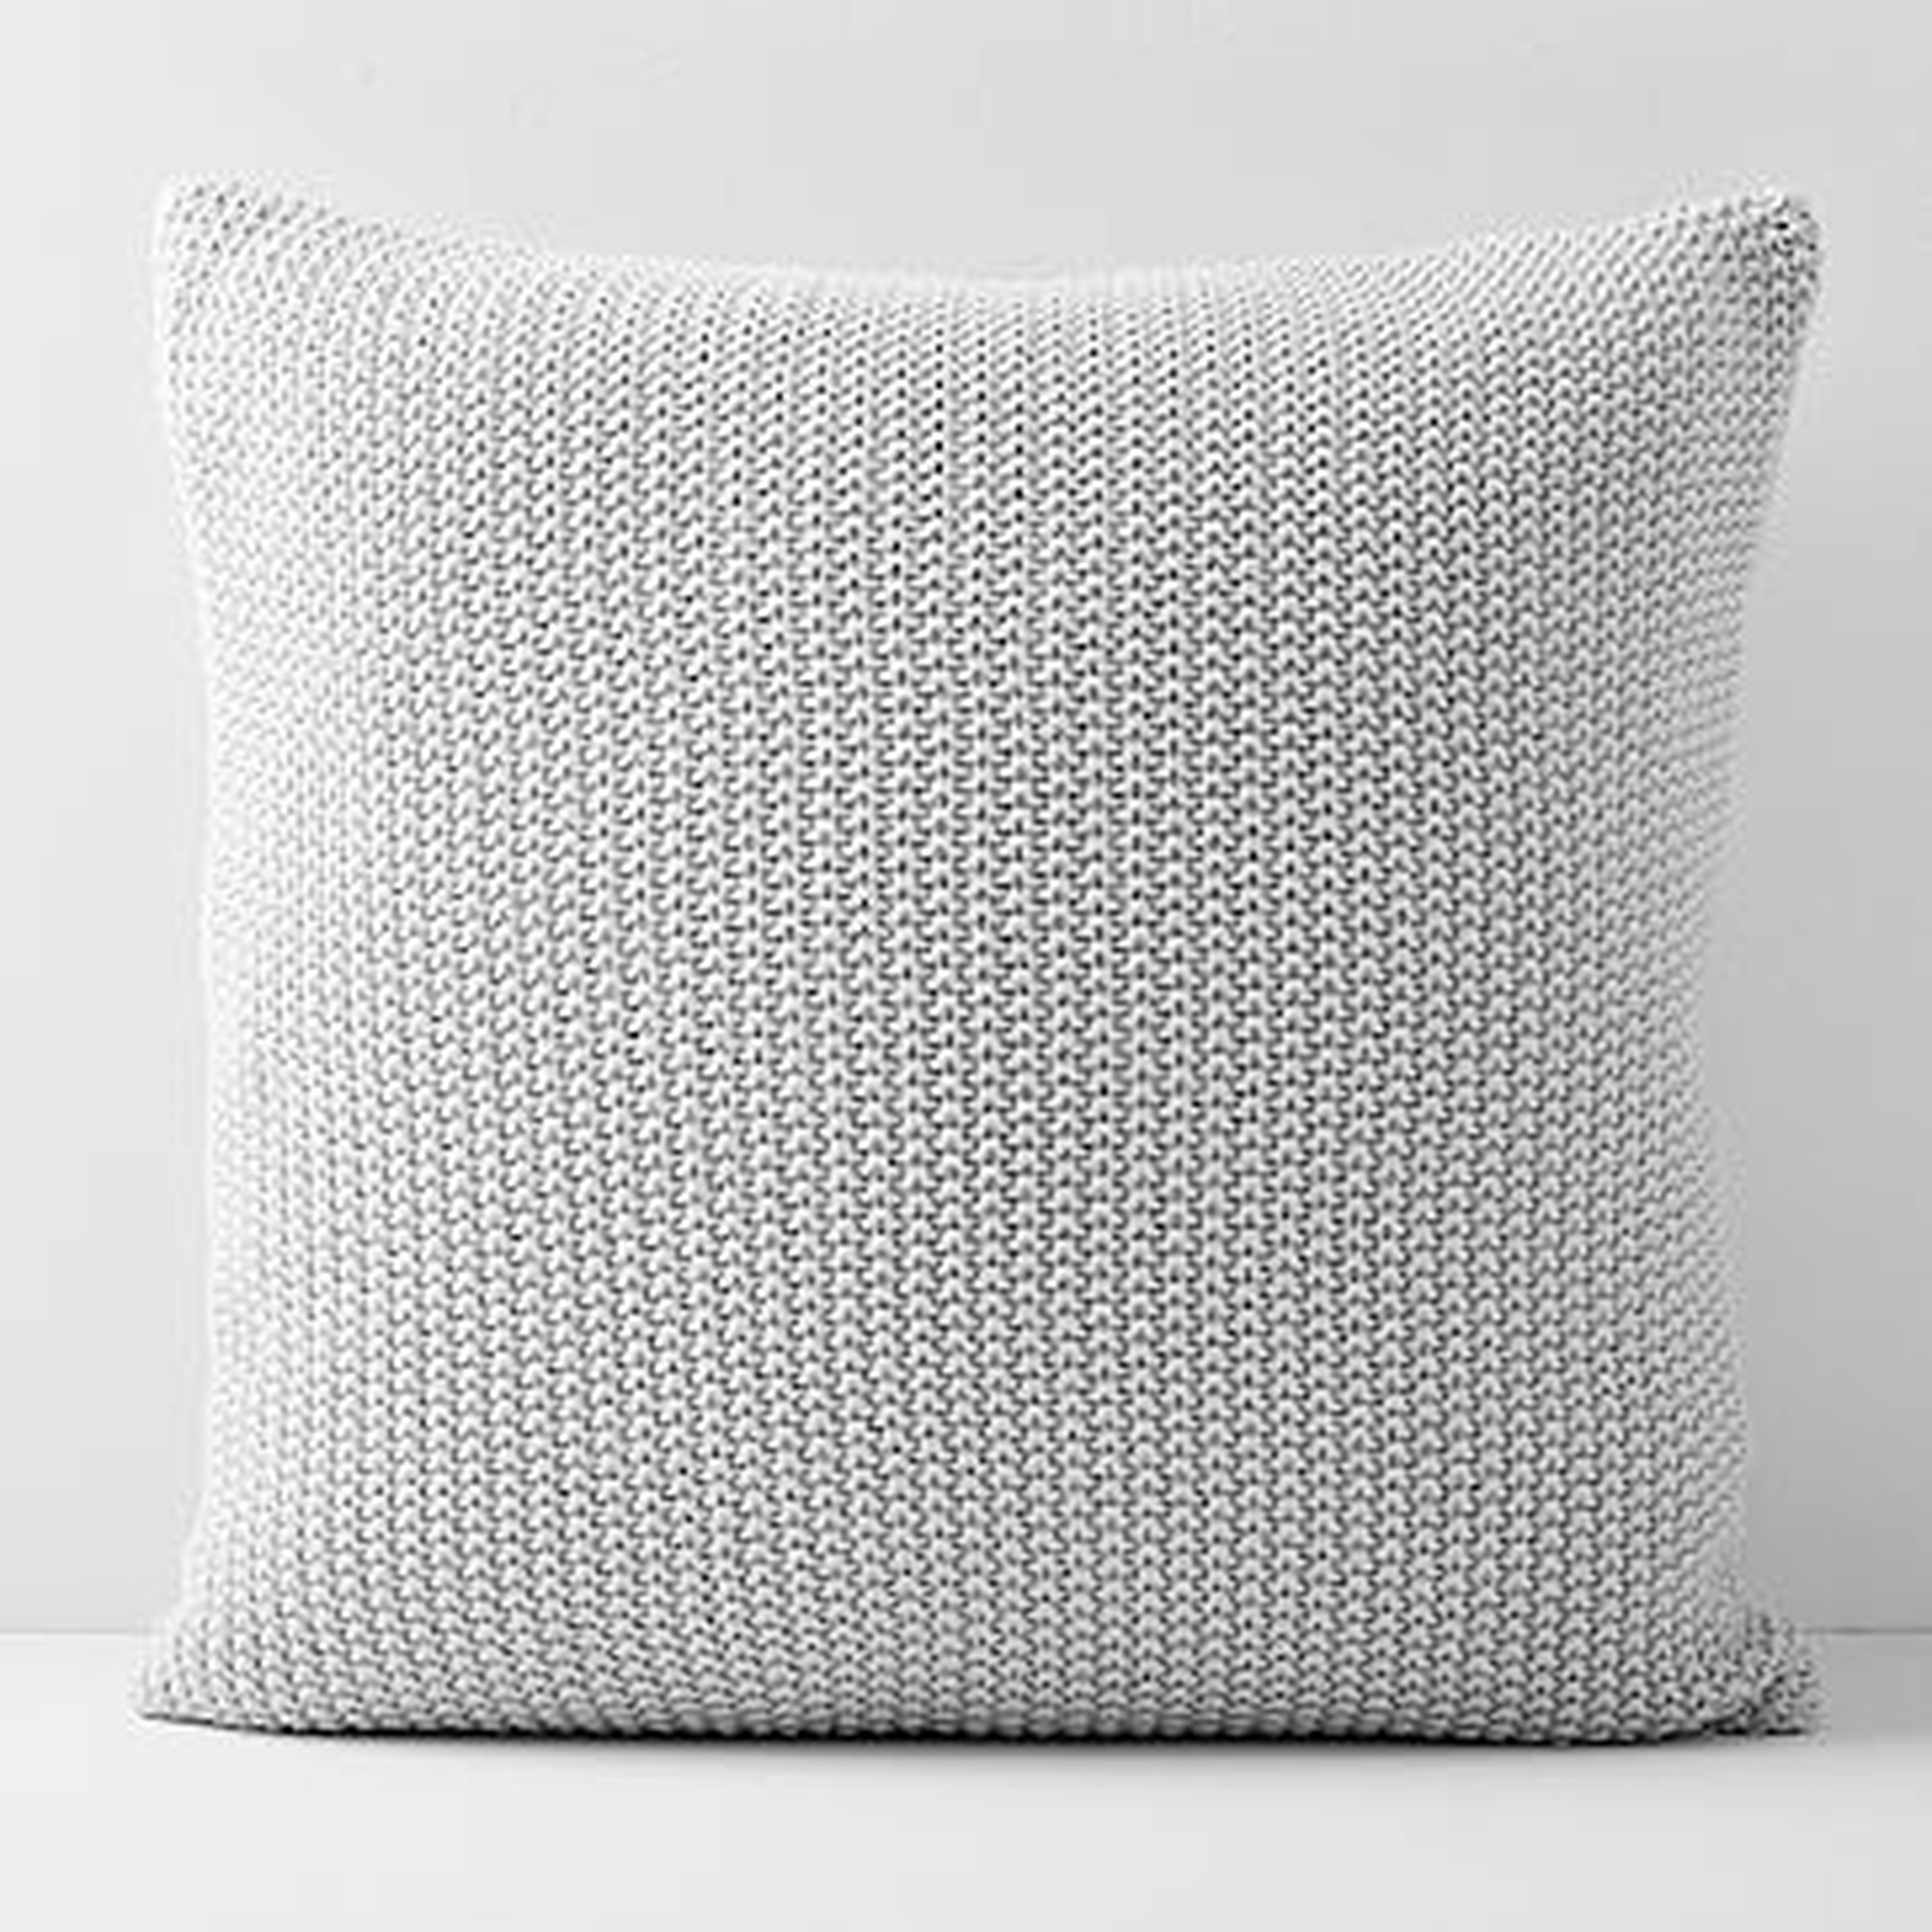 Cotton Knit Pillow Cover 20"x20", Set of 2, Frost Gray - West Elm